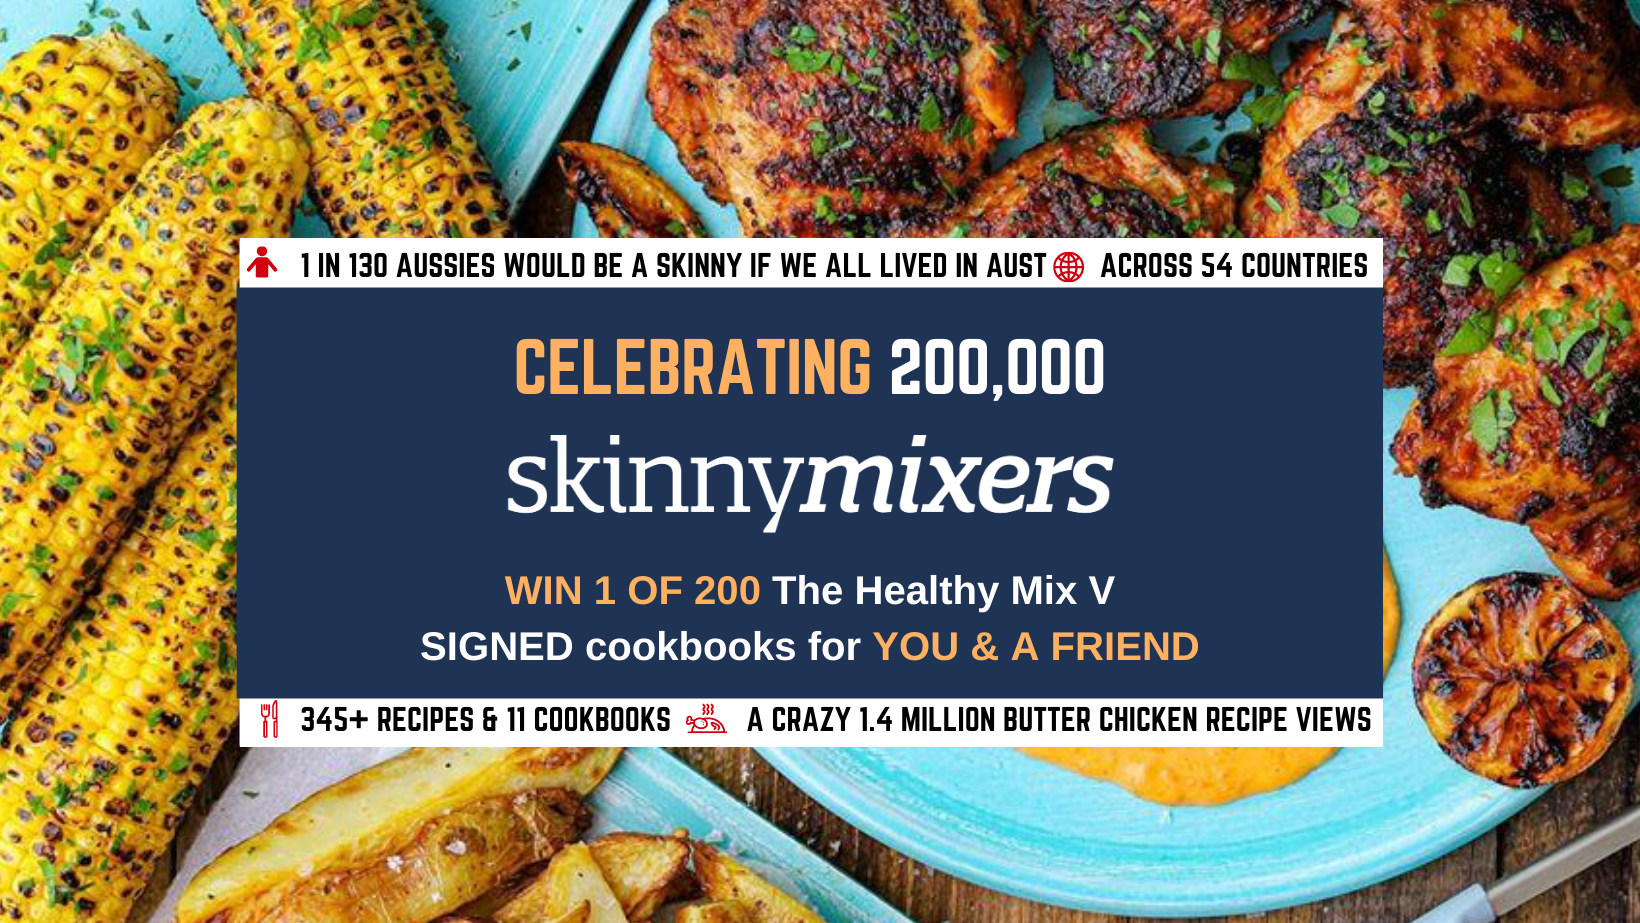 WIN! 1 of 200 The Healthy Mix V